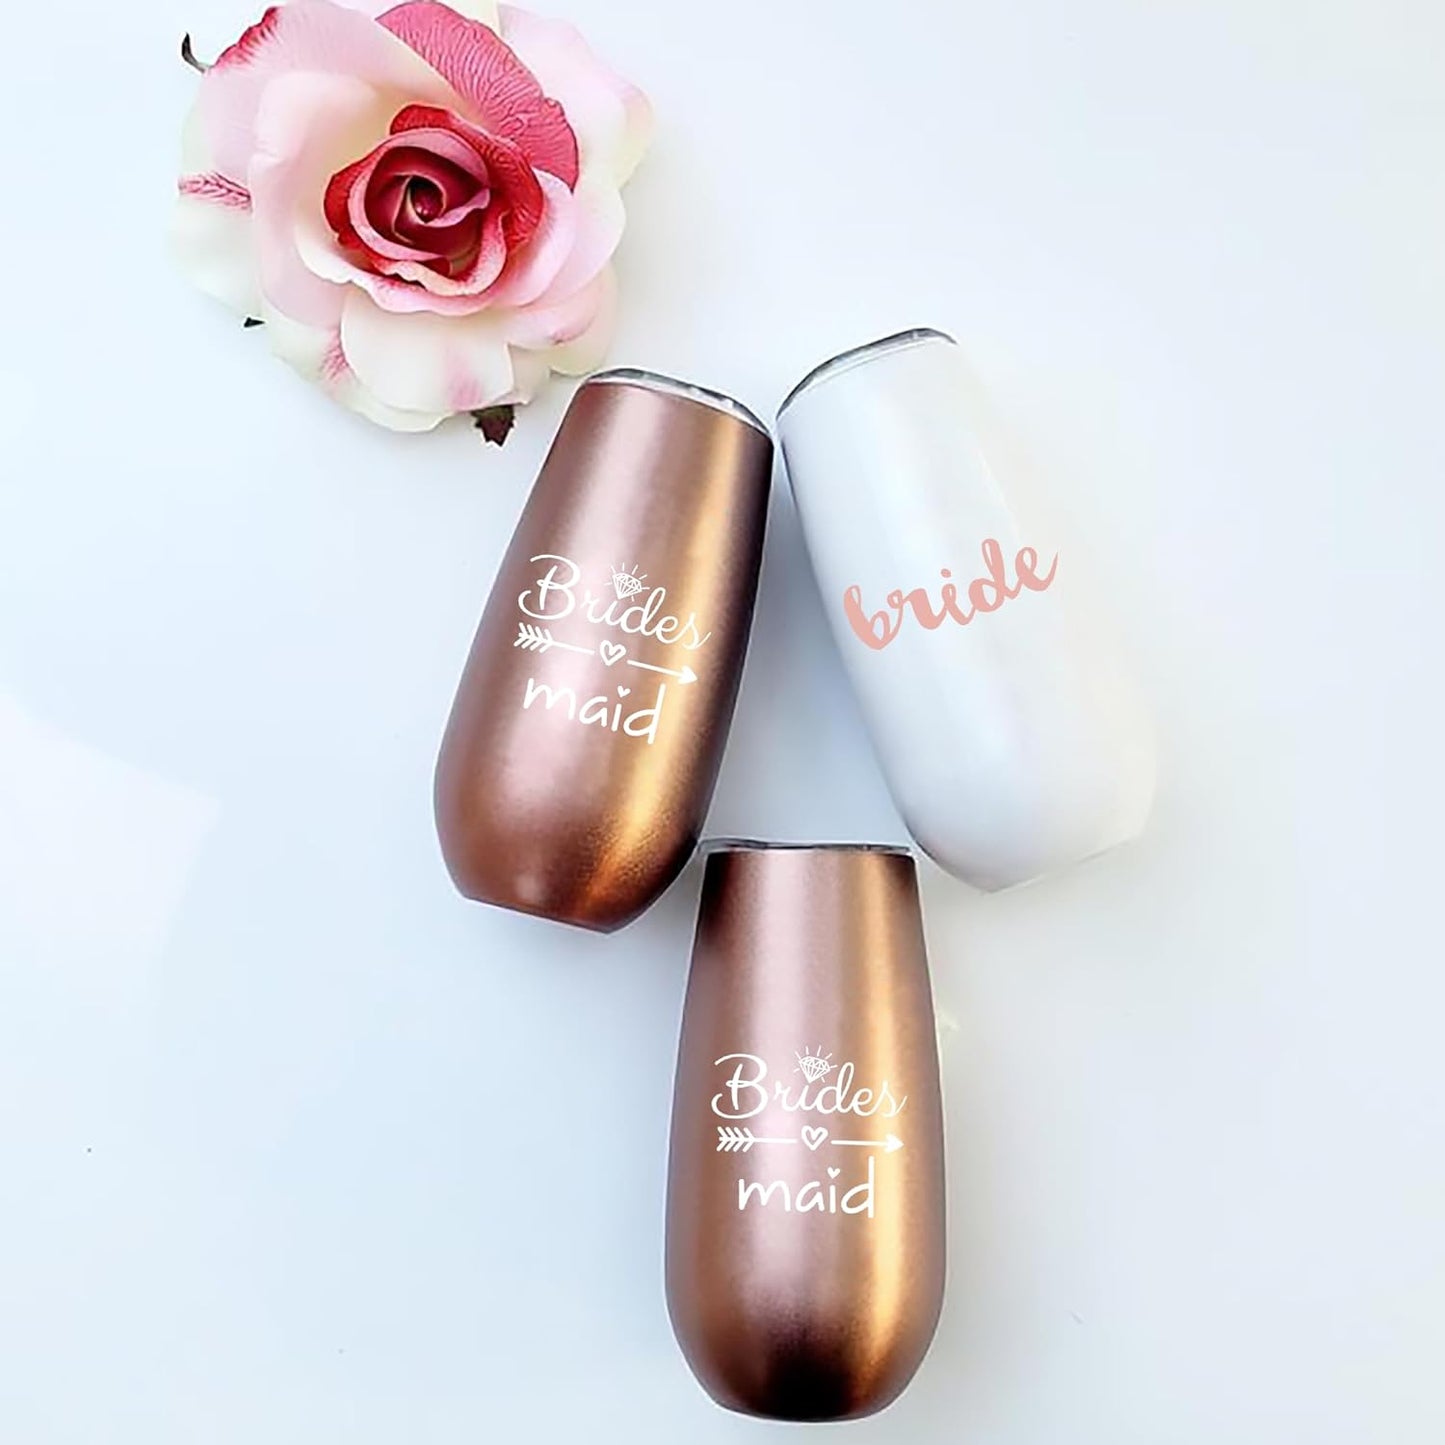 Bride to Be Champagne Flute | 6 Oz Bridesmaid Stainless Steel Wine Tumblers | Bridal Shower Gift, Bridesmaid Proposal Box, Bride Tribe Bachelorette Party Supplies | Bridal Party Cups & Bridesmaid Cups